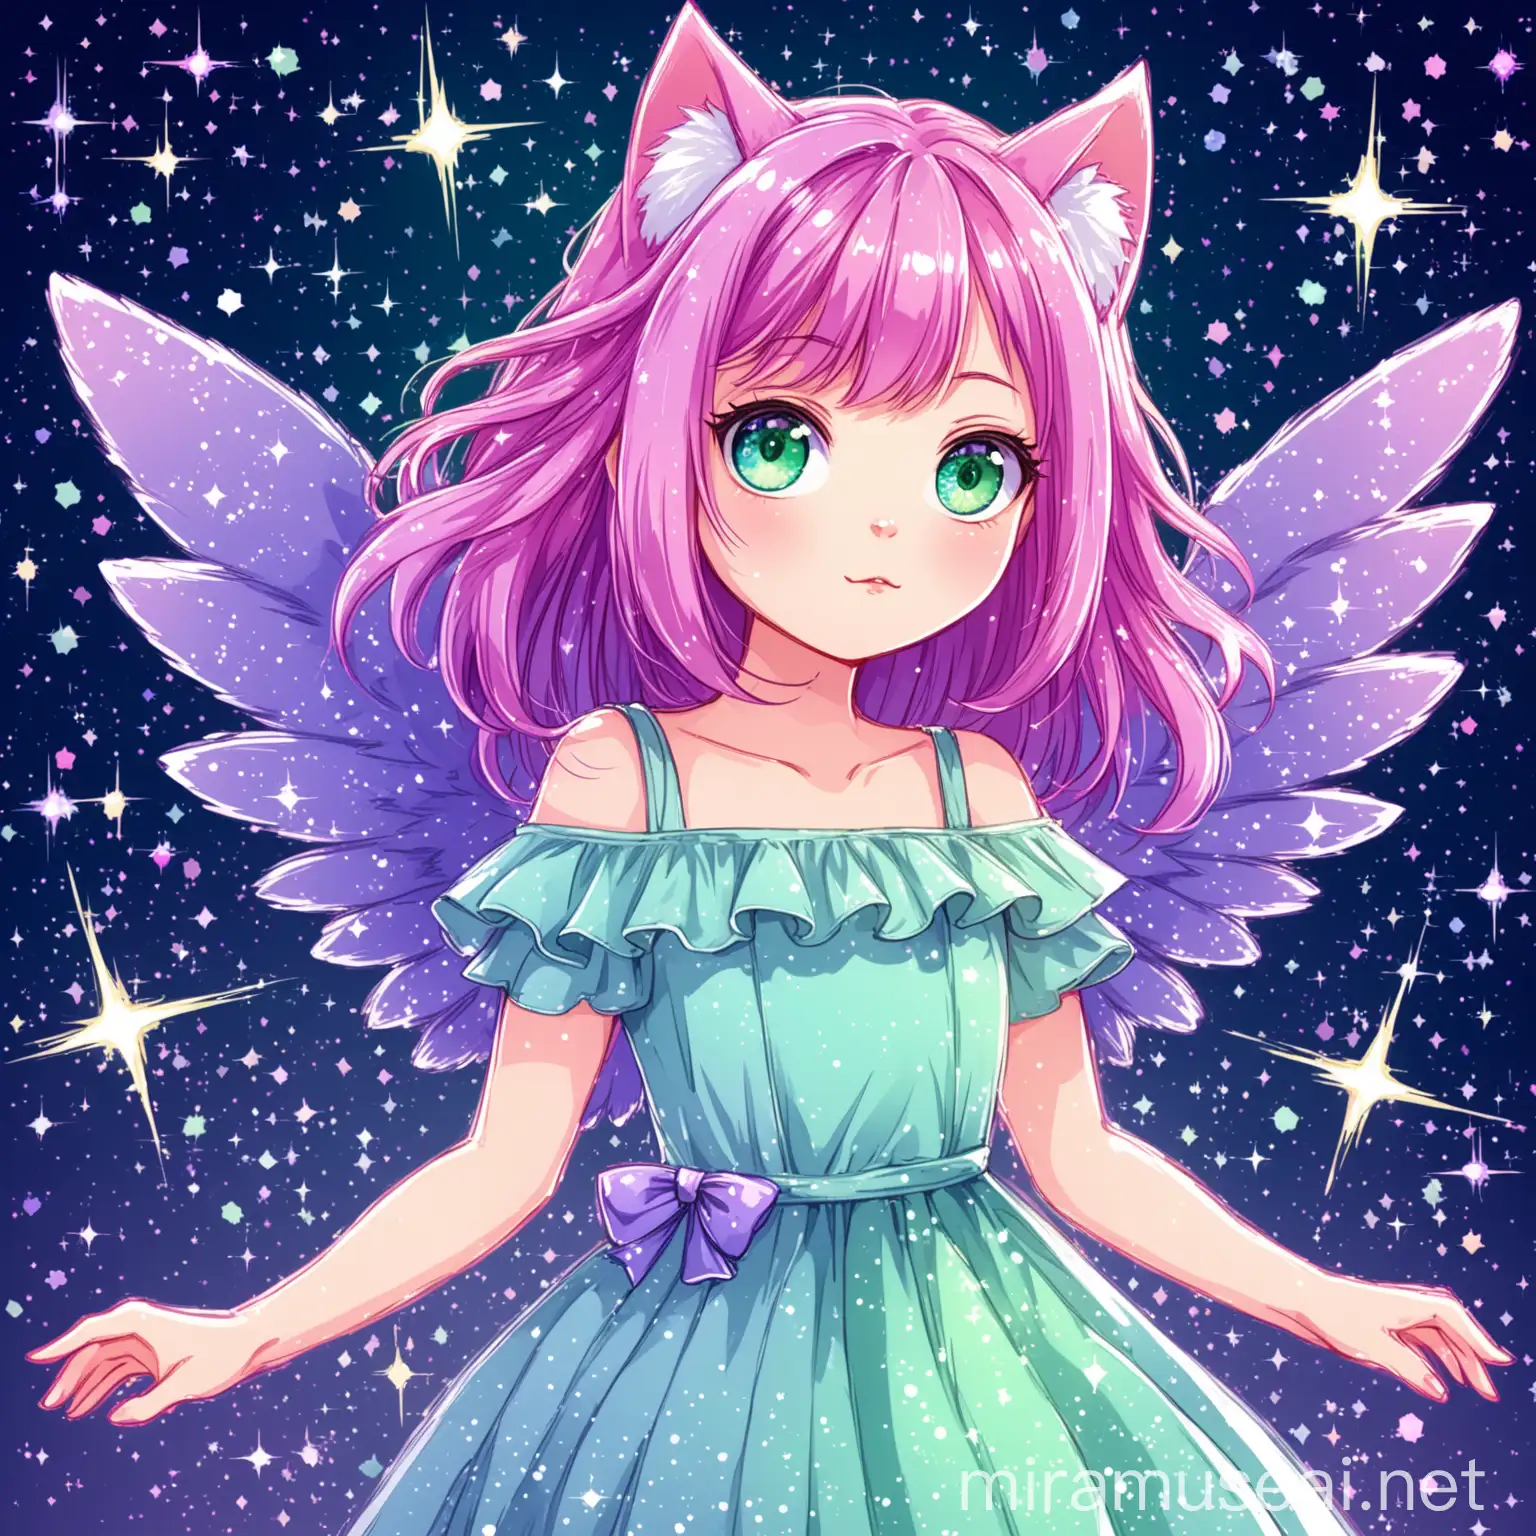 Fantasy Girl with PurplePink Hair Wings and Cat Ears in a BlueGreen Dress